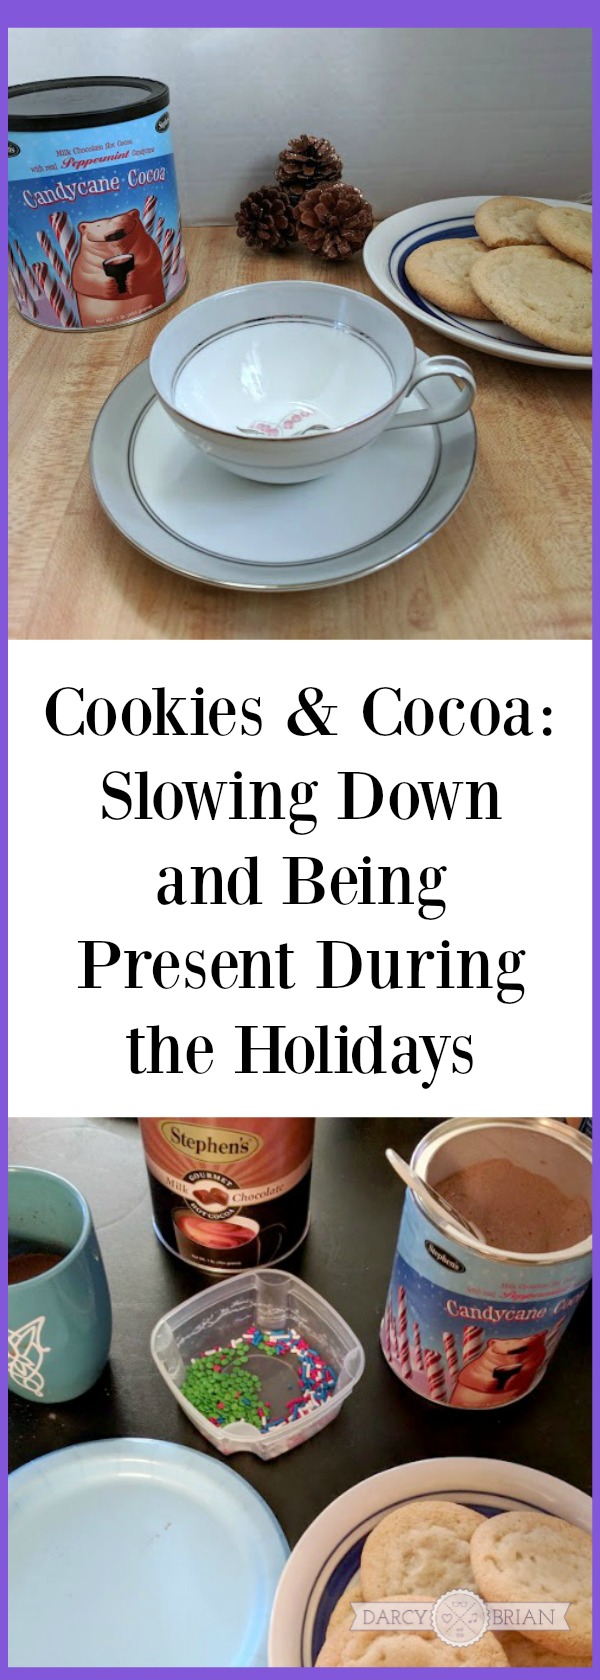 AD: How do you slow down during the holiday season to be present with your kids? Click to read how this mom uses hot cocoa to do just that as part of a family holiday tradition. #StephensGourmet